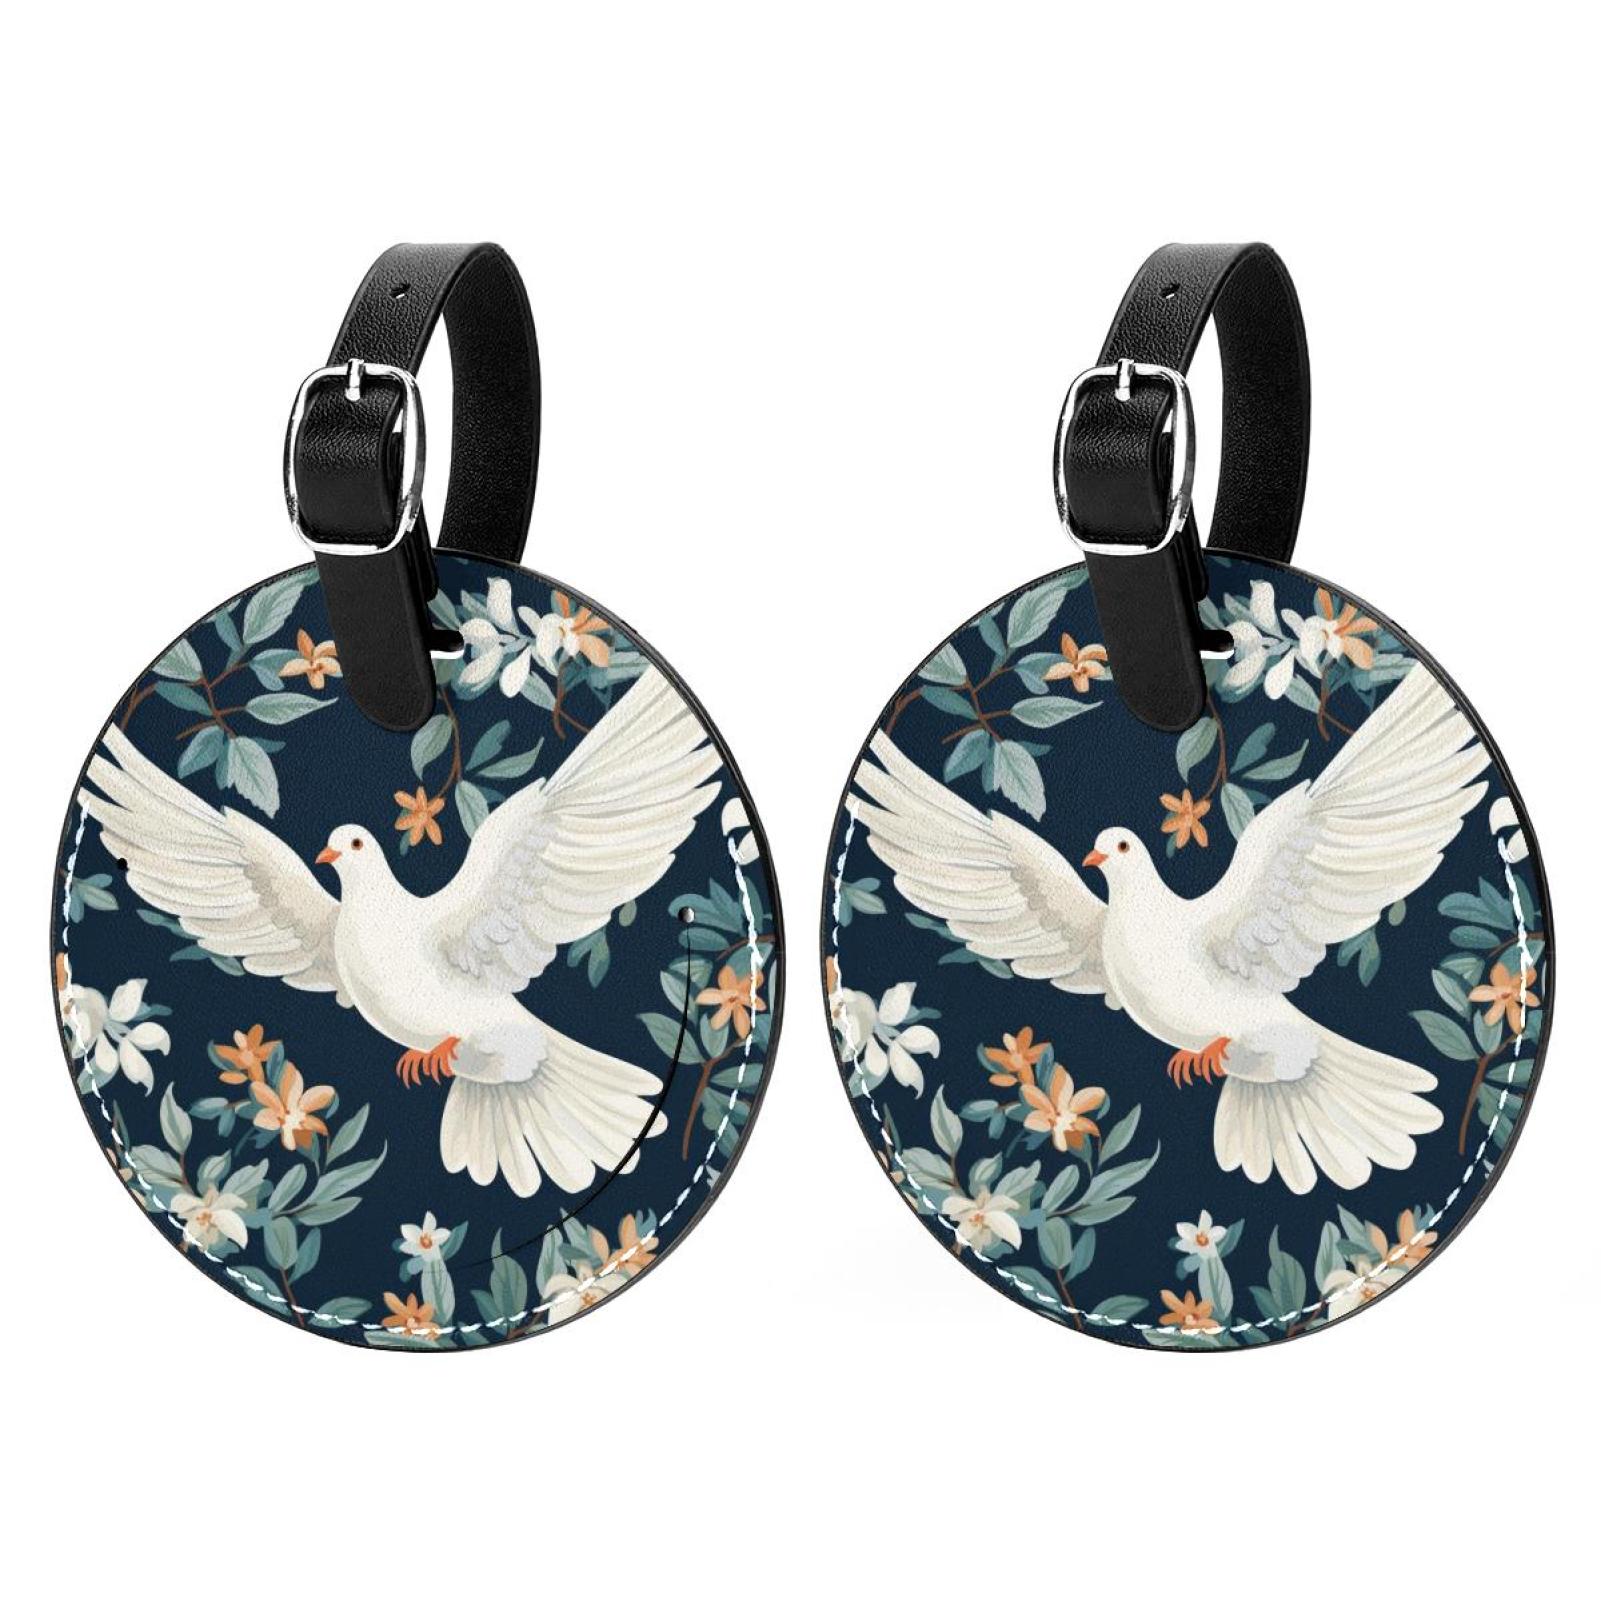 Peace Dove Set of 2pcs PU Leather Round Suitcase Tags with Privacy ...